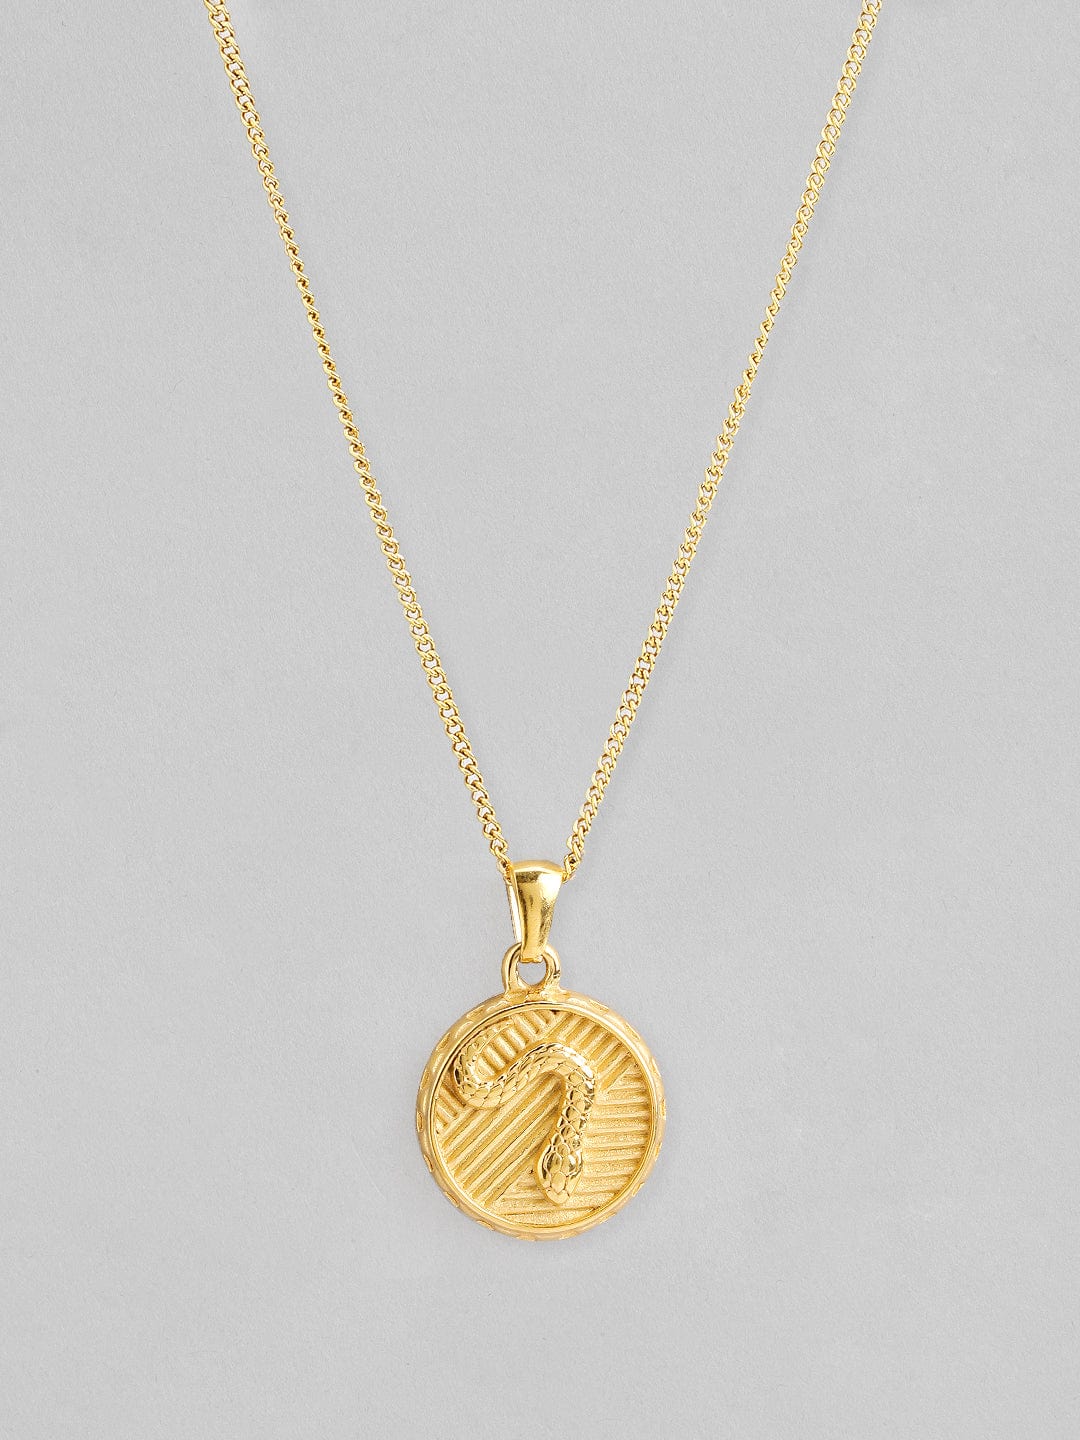 Rubans Voguish 18K Gold Plated Stainless Steel Waterproof Chin With Circle Embossed Pendant. Chain &amp; Necklaces